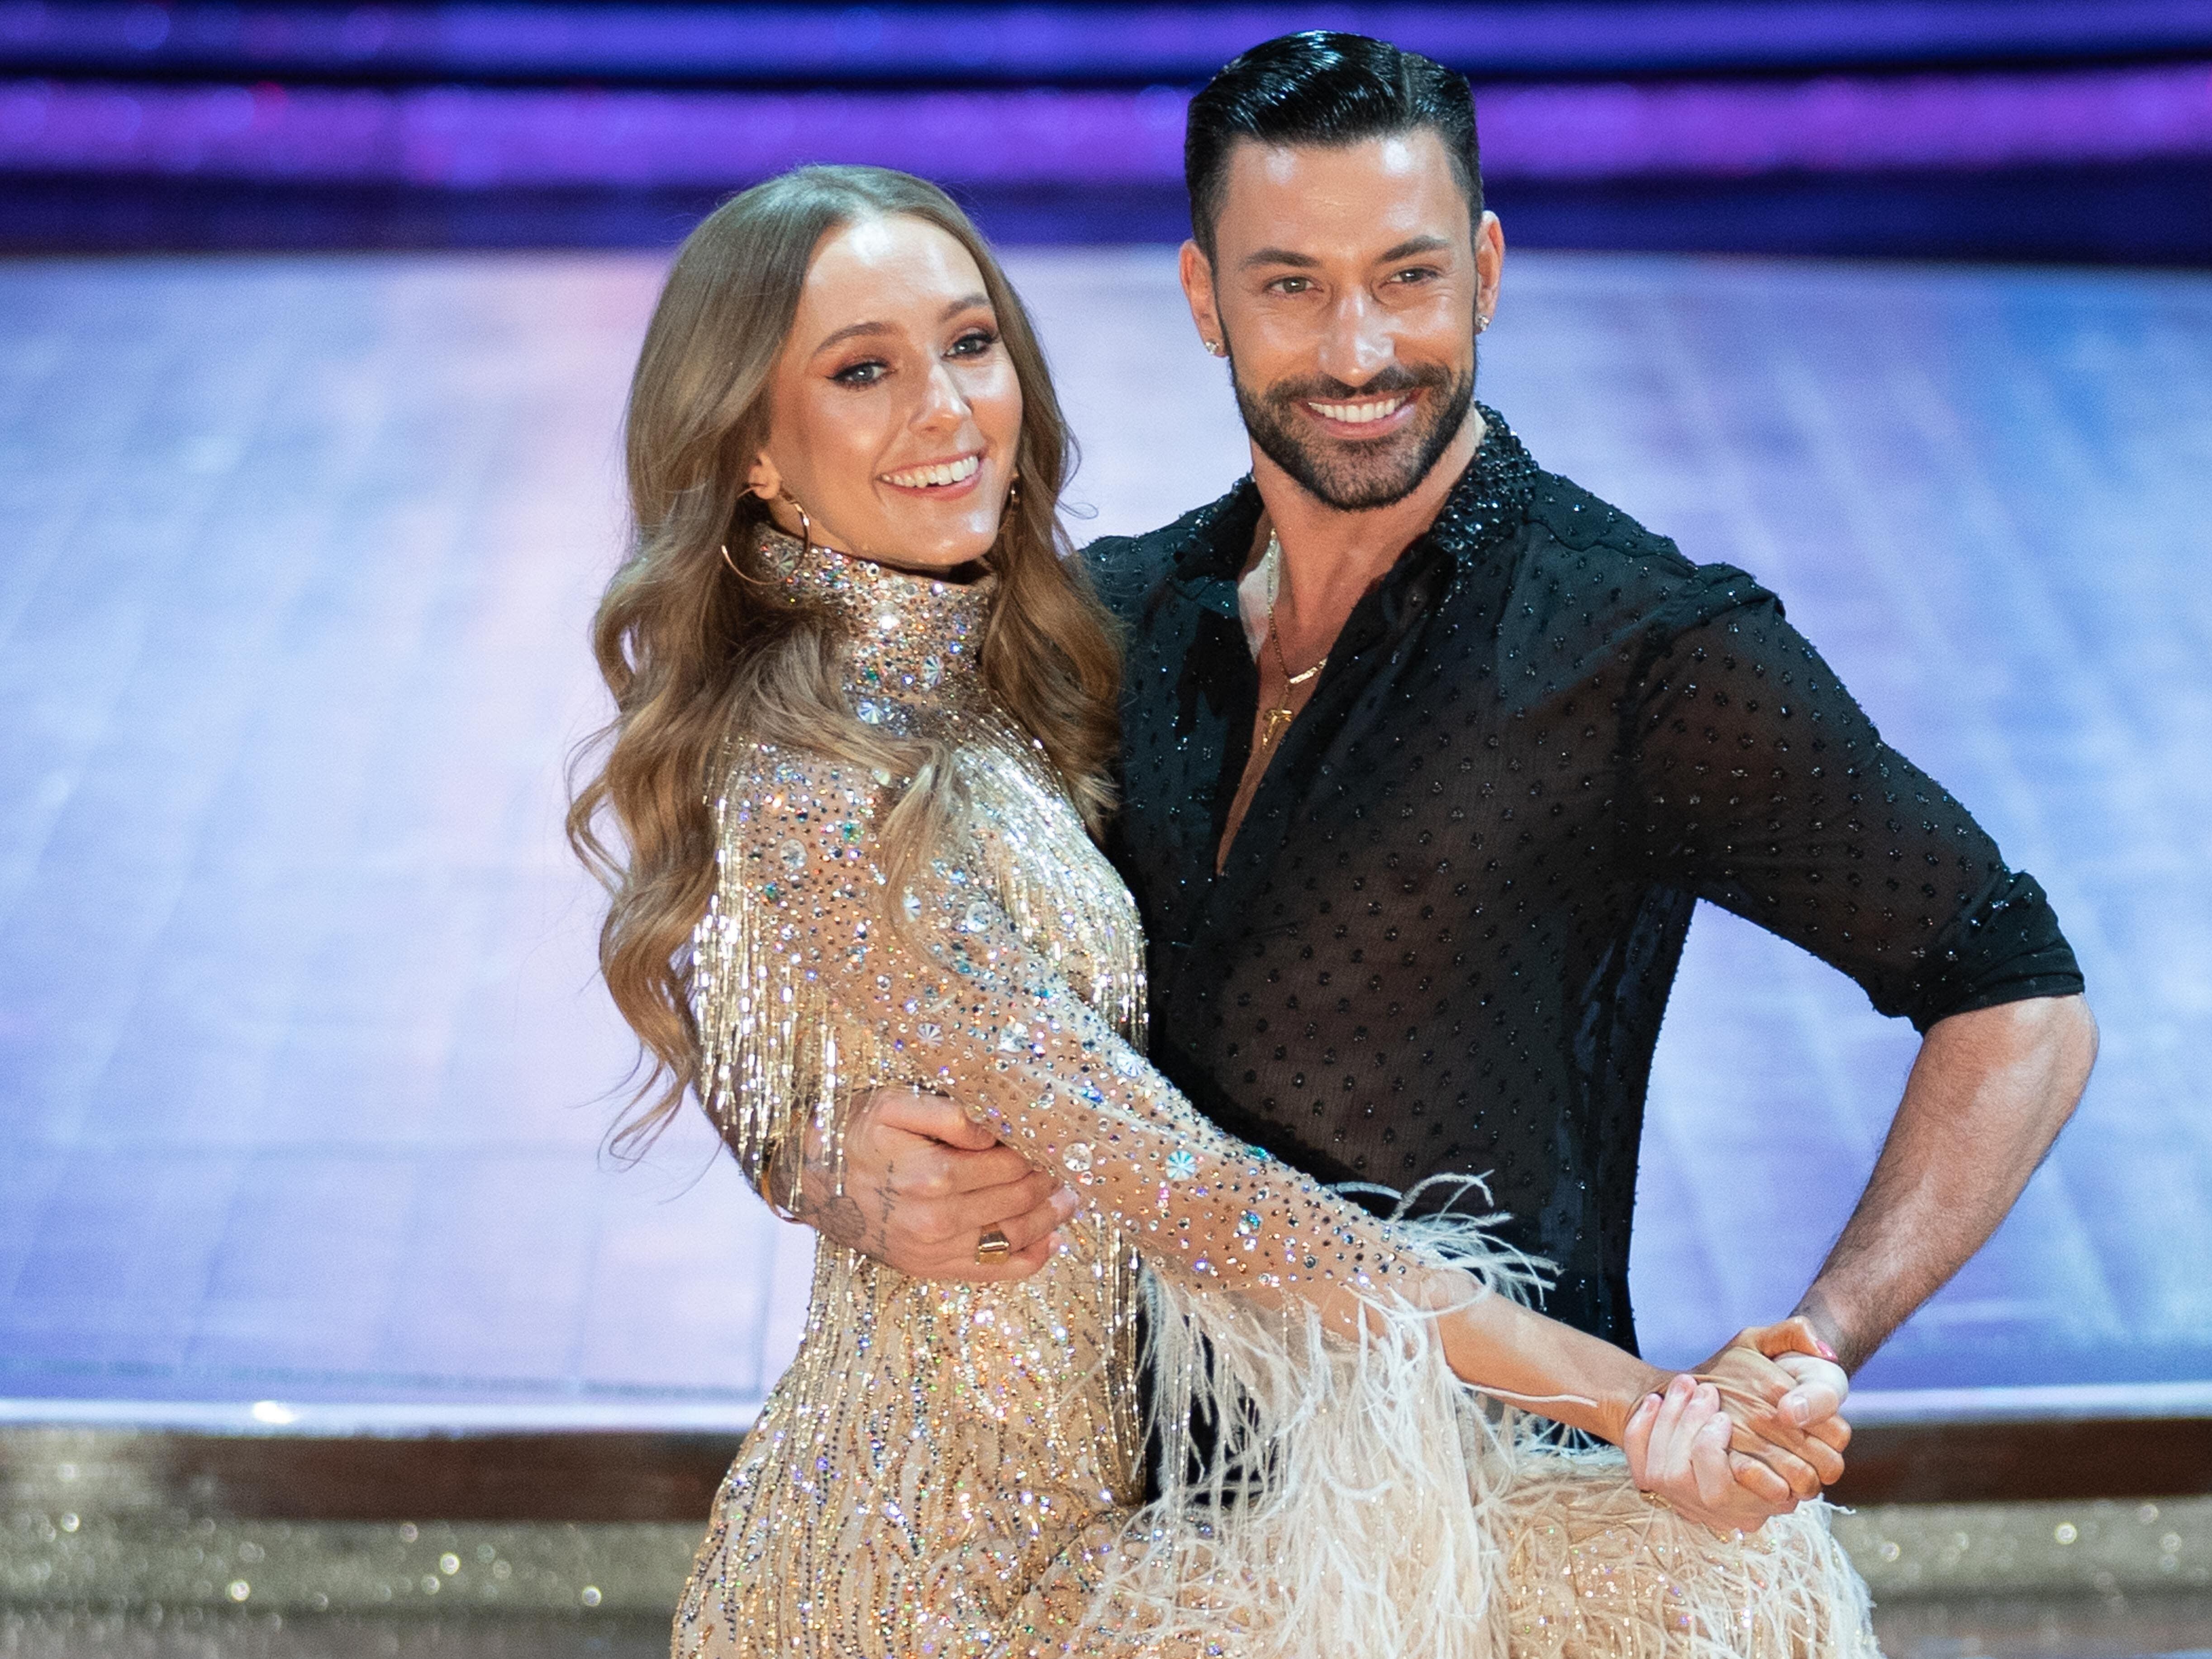 Giovanni Pernice: Strictly winner who travels with ‘best friend’ Anton Du Beke